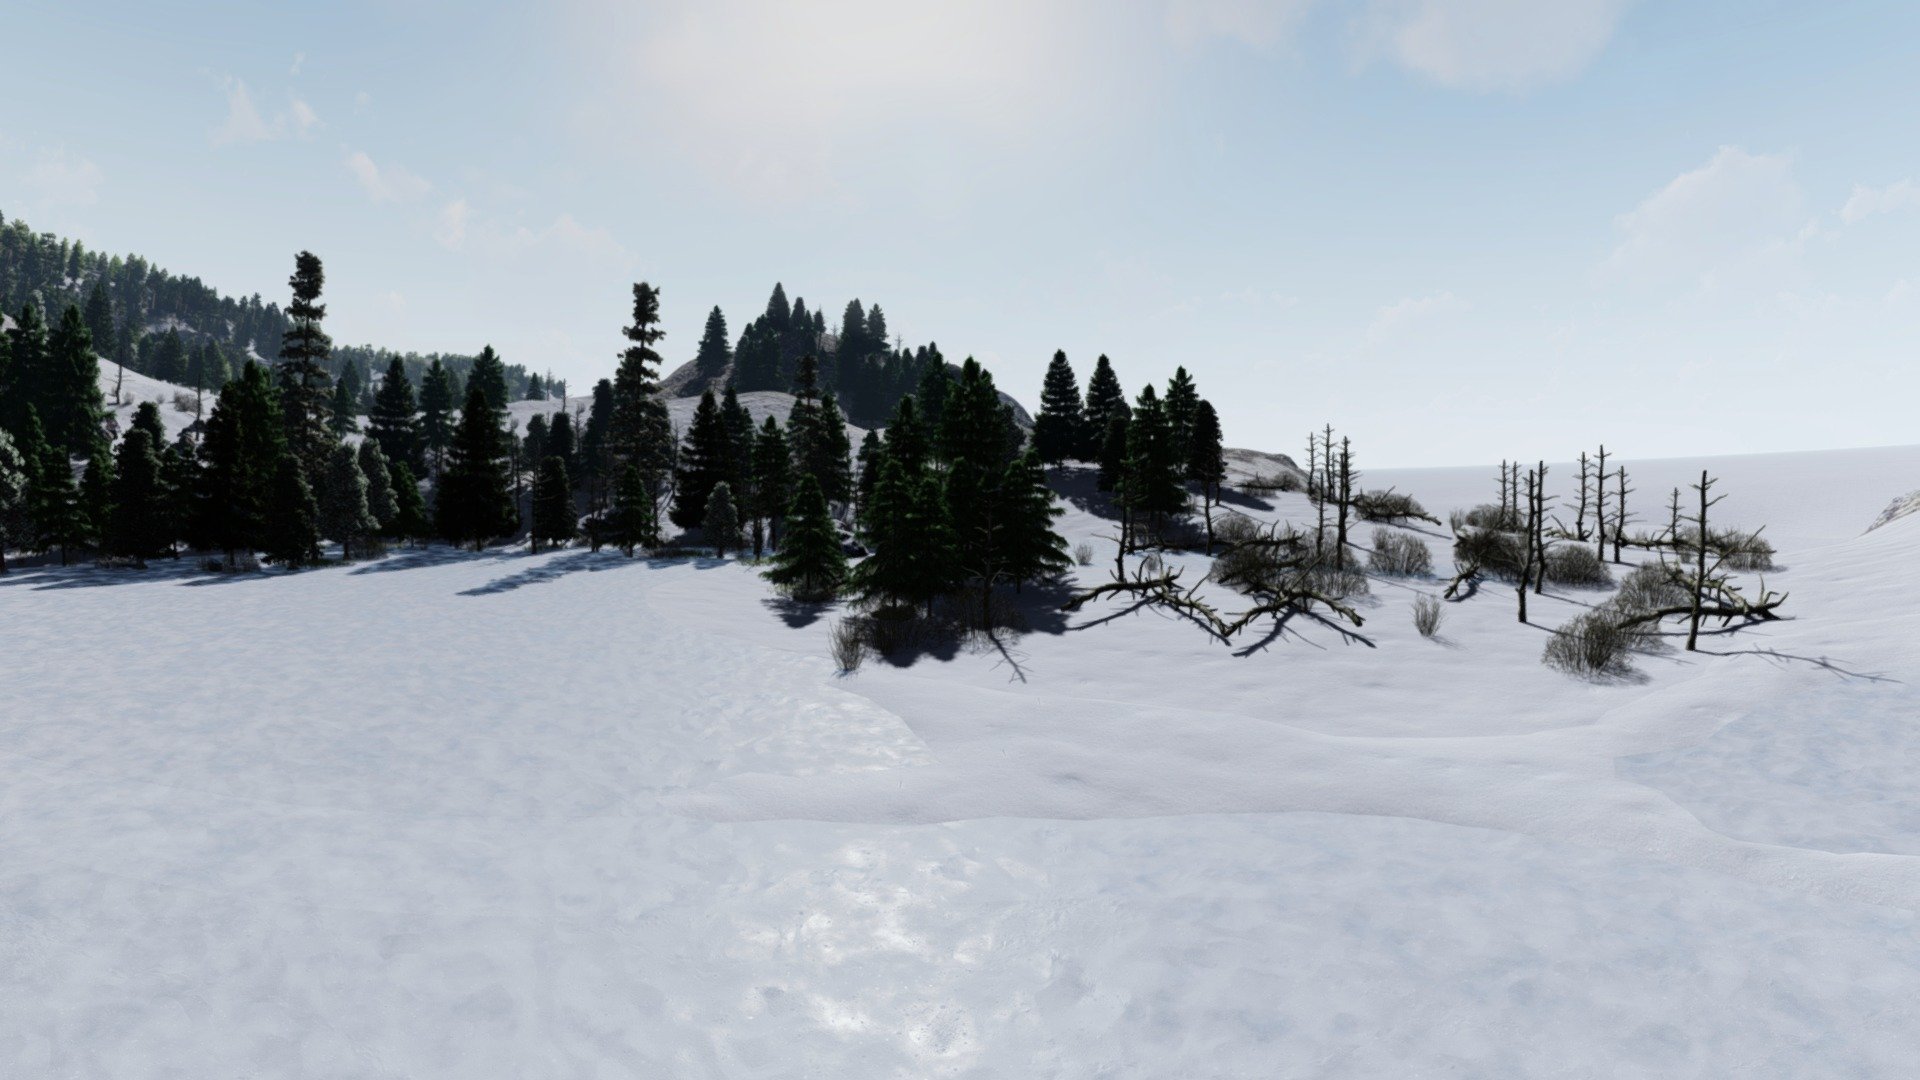 HDRI &amp; SKY BOX 8K - SNOW COVERED PINE FOREST





Image 360- 8k resolution




HDRI File



Used as a landscape cover in architectural, interior and landscape design software, used as hdri images, wallpaper&hellip; - HDRI & SKY BOX 8K - SNOW COVERED PINE FOREST - Buy Royalty Free 3D model by Architecture_Interior 3d model